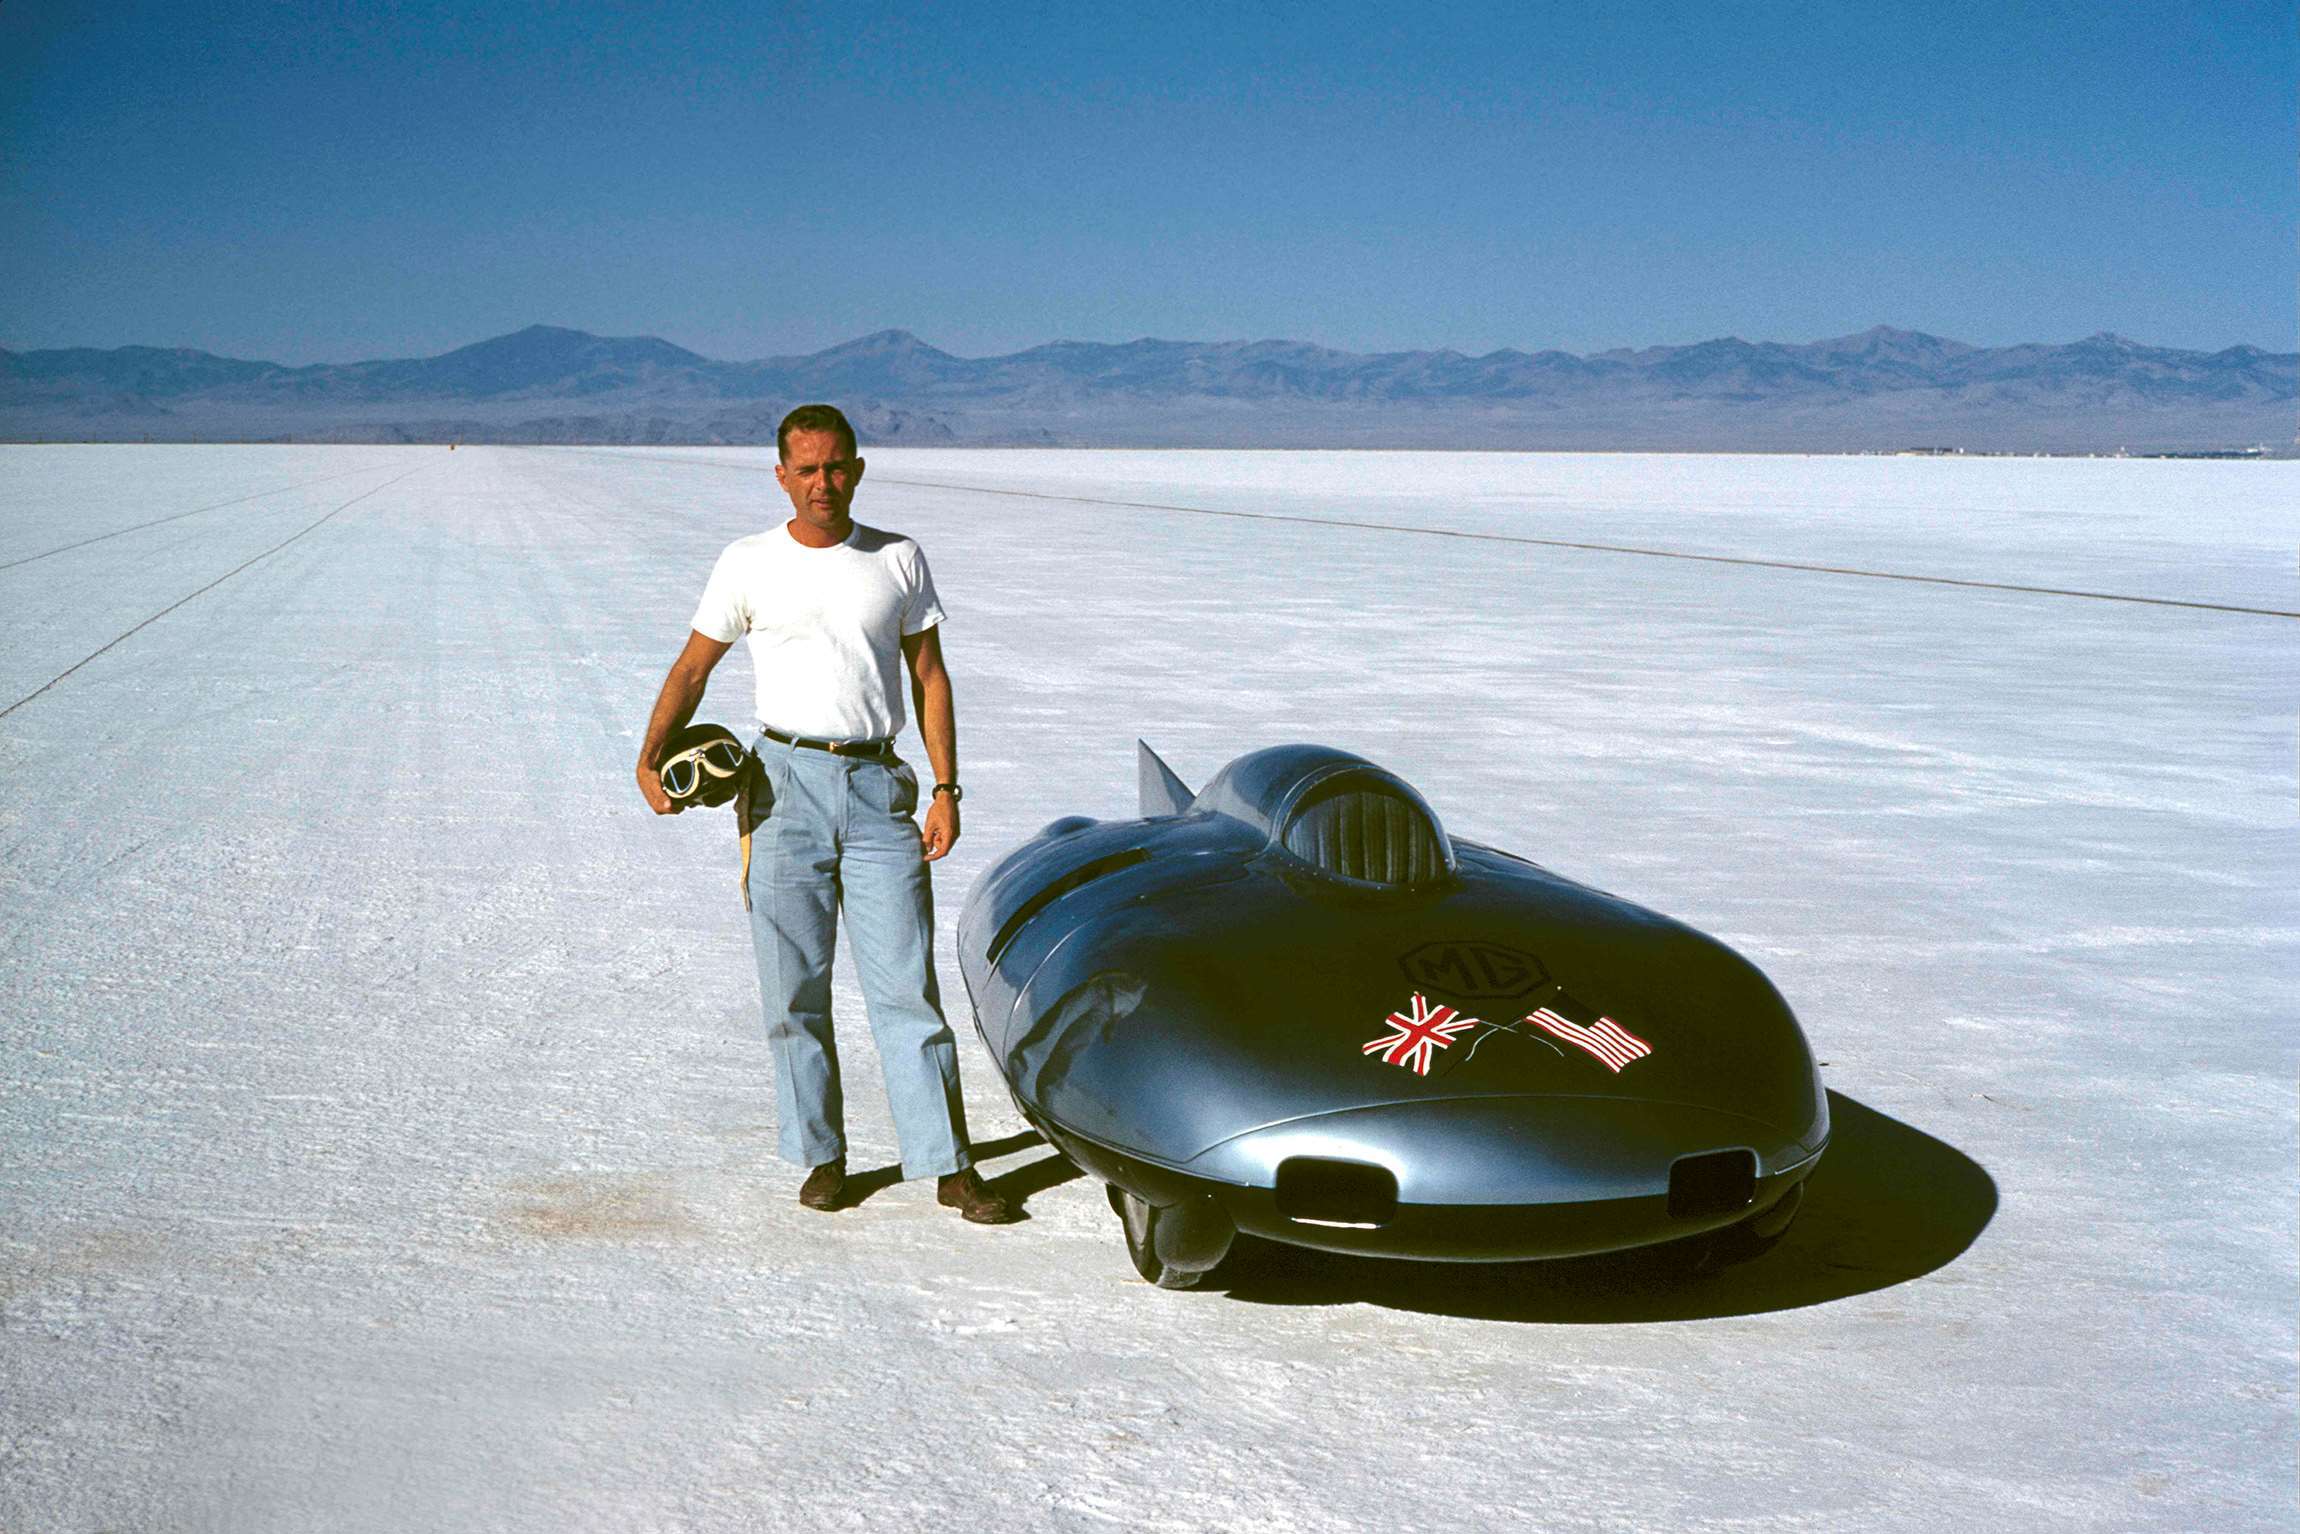 1957 a friend using Phil’s leica to snap him at Bonneville with MG EX181 record car